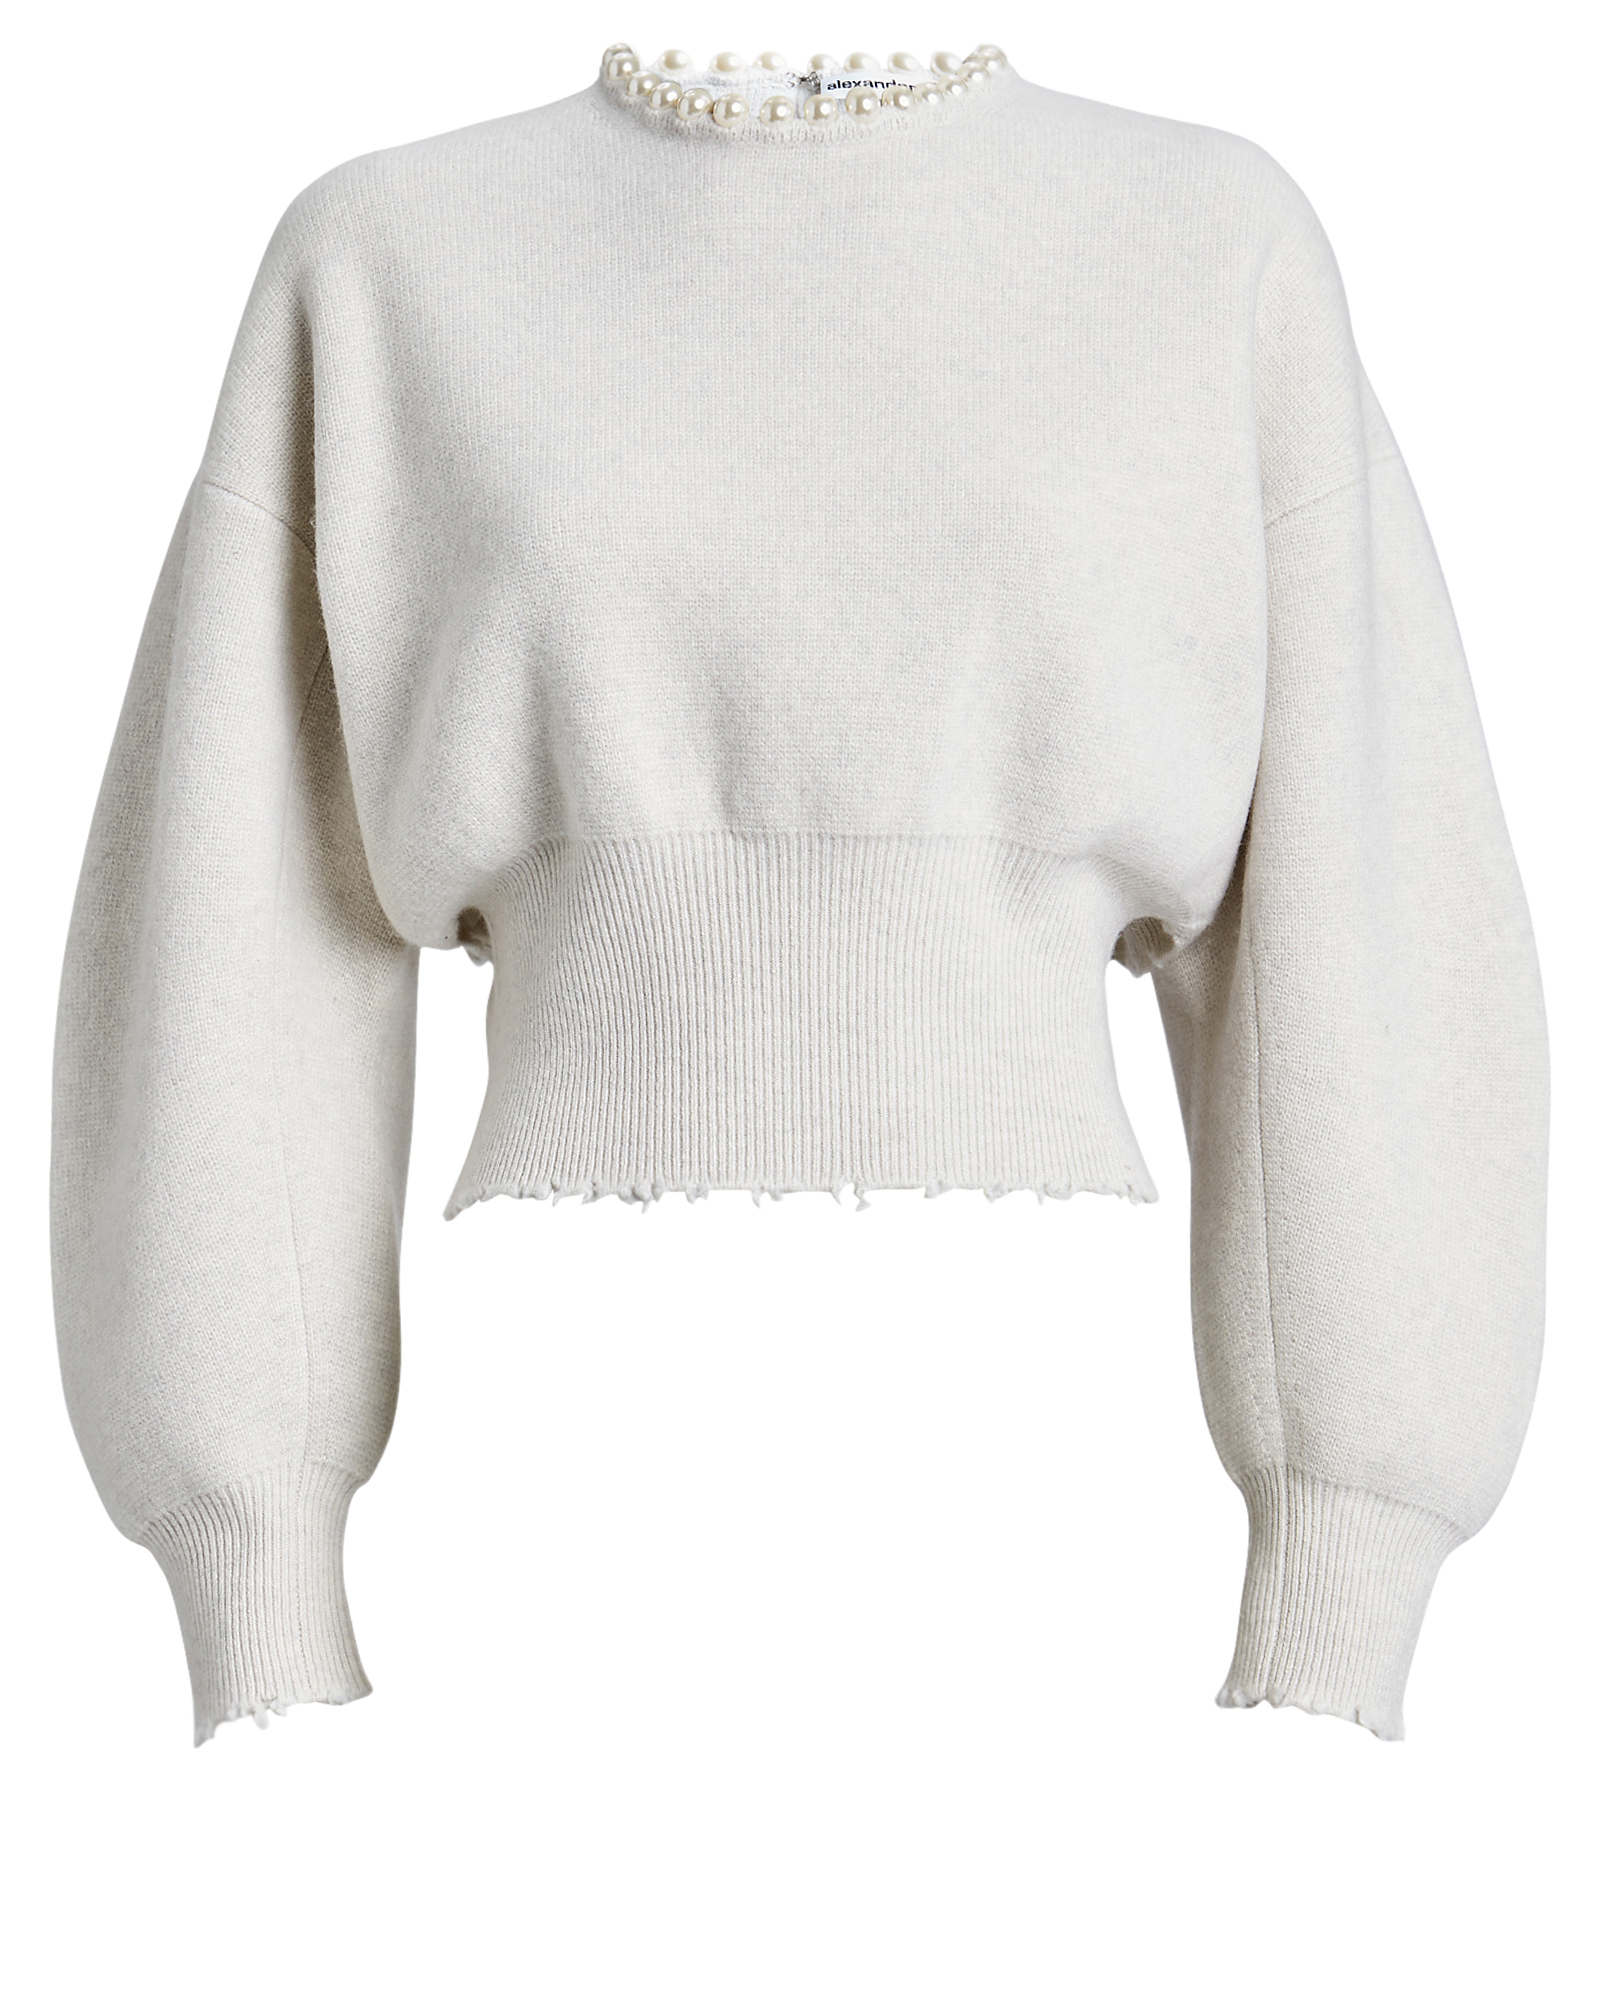 Alexander Wang | Pearl Necklace Wool-Cashmere Sweater | INTERMIX®